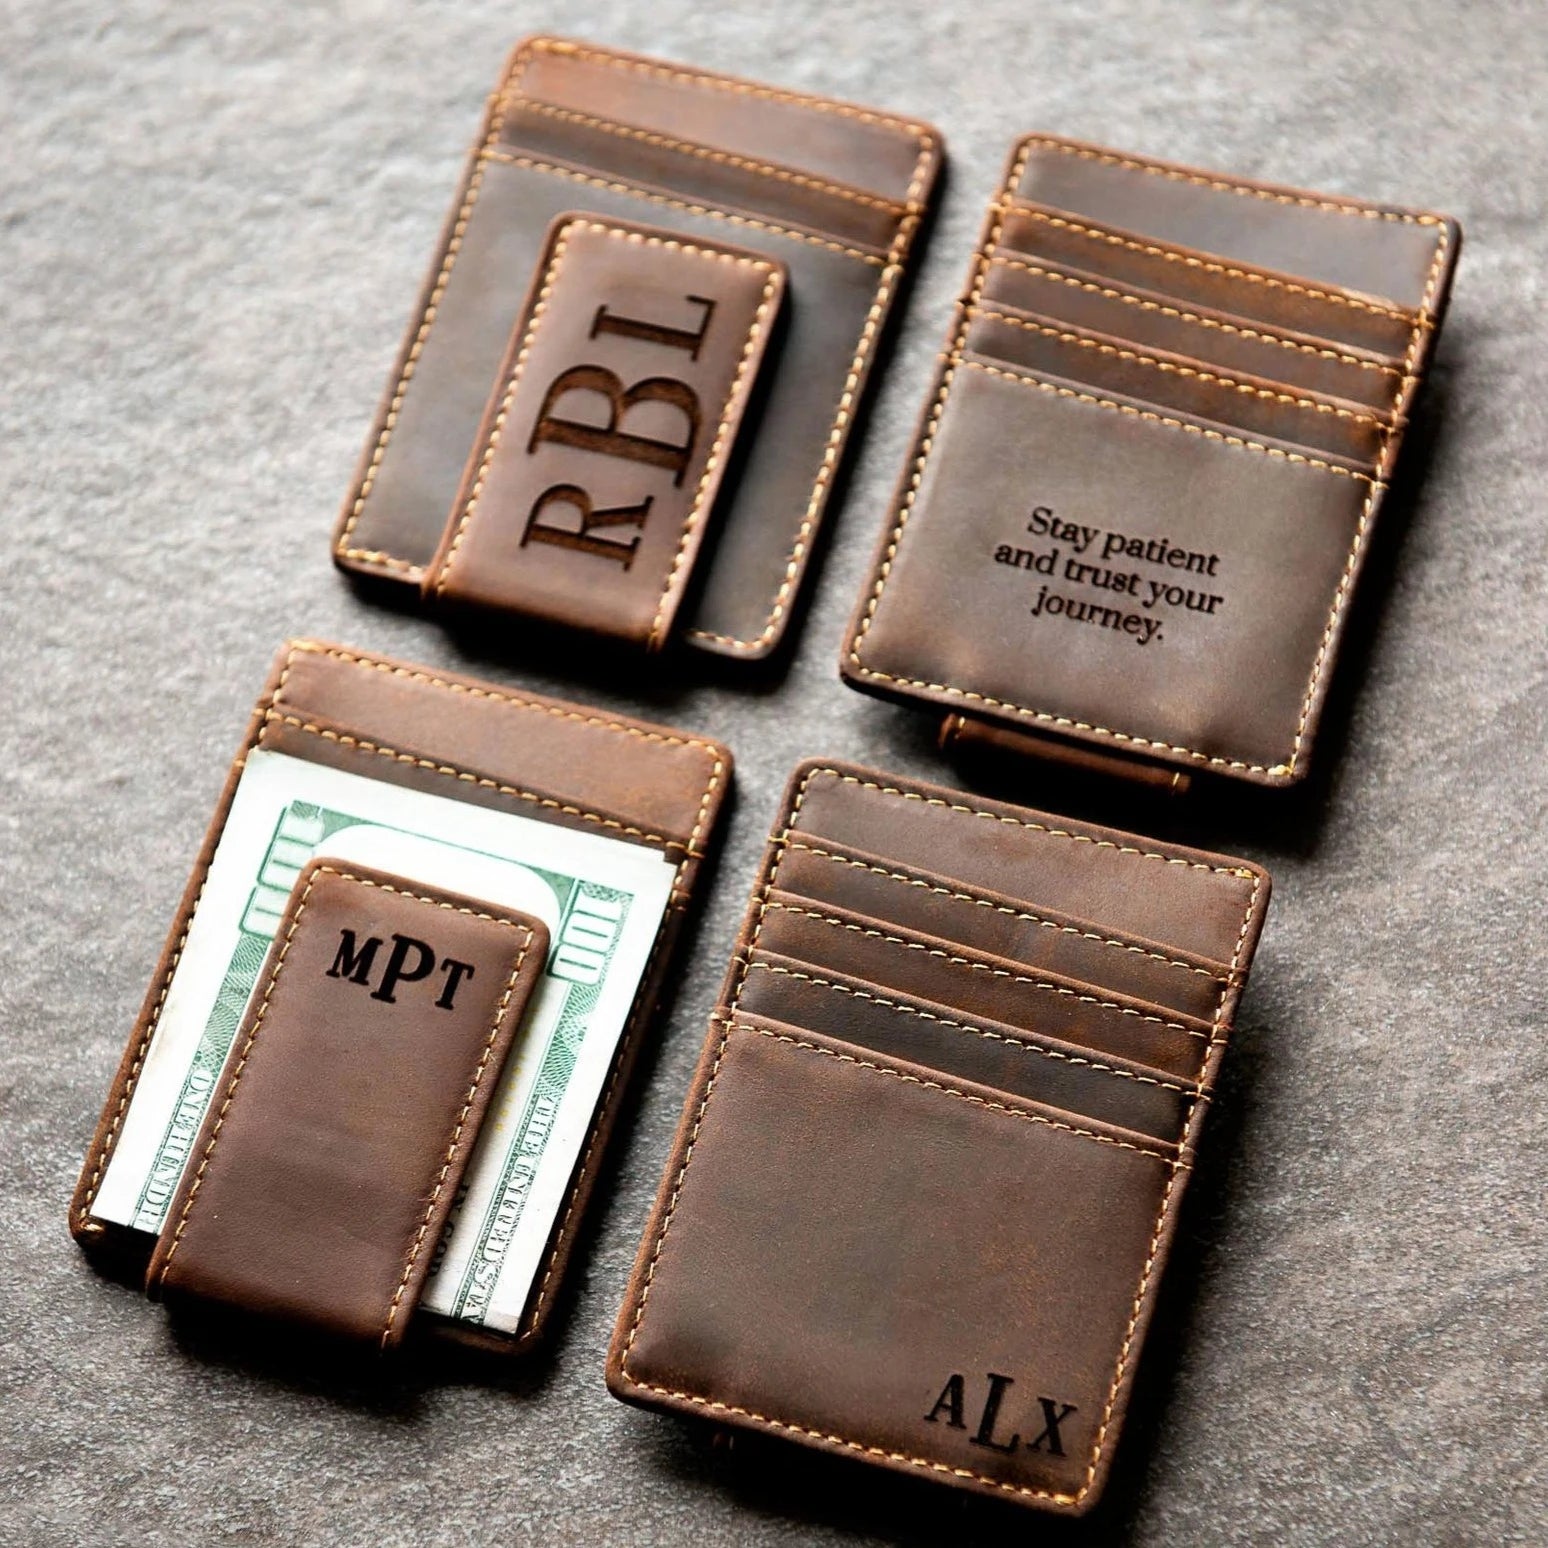  Personalized Engraved Monogrammed Mens Leather Wallet